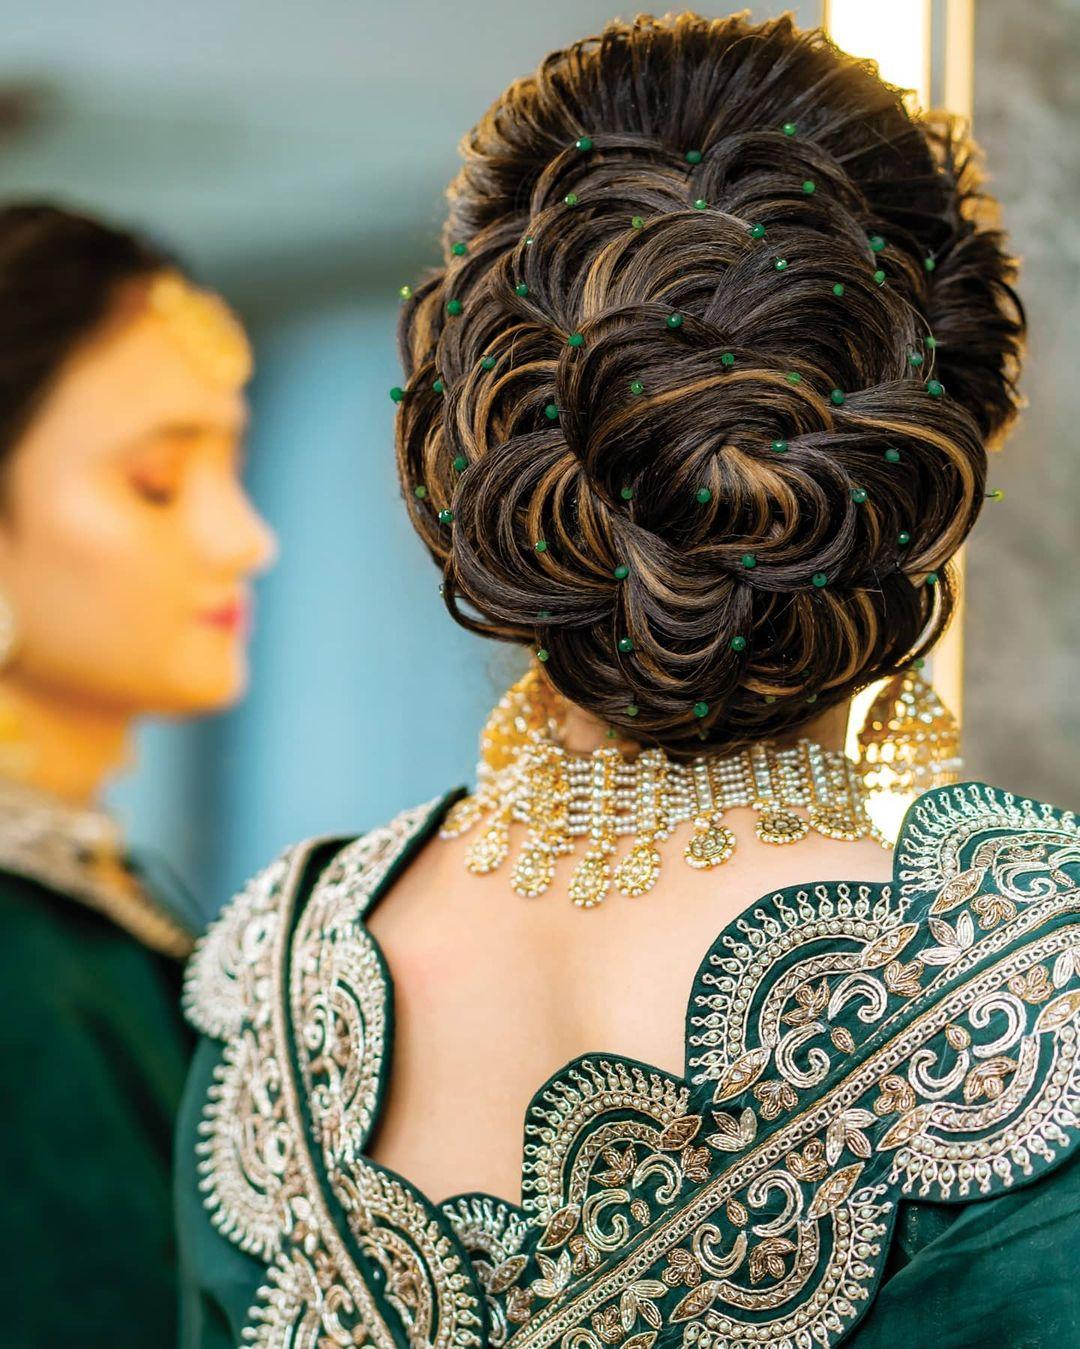 13 Engagement Hairstyle Ideas To Get The Perfect Wedding Look